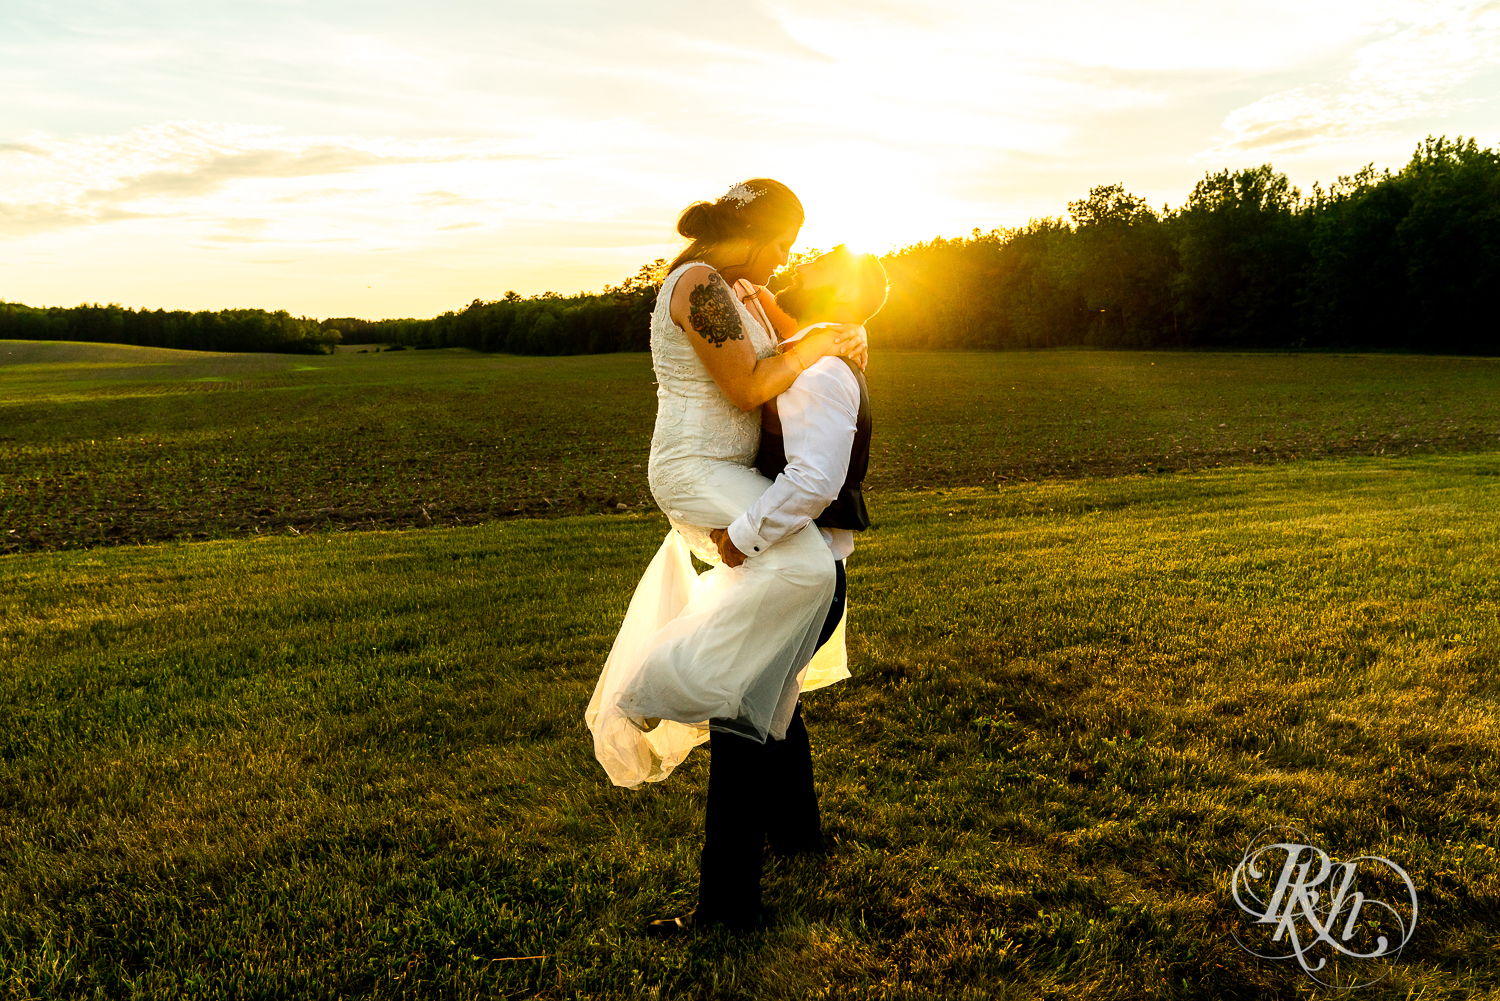 Groom lifts bride in field during sunset at wedding at Pine Peaks Event Center in Pine River, Minnesota.